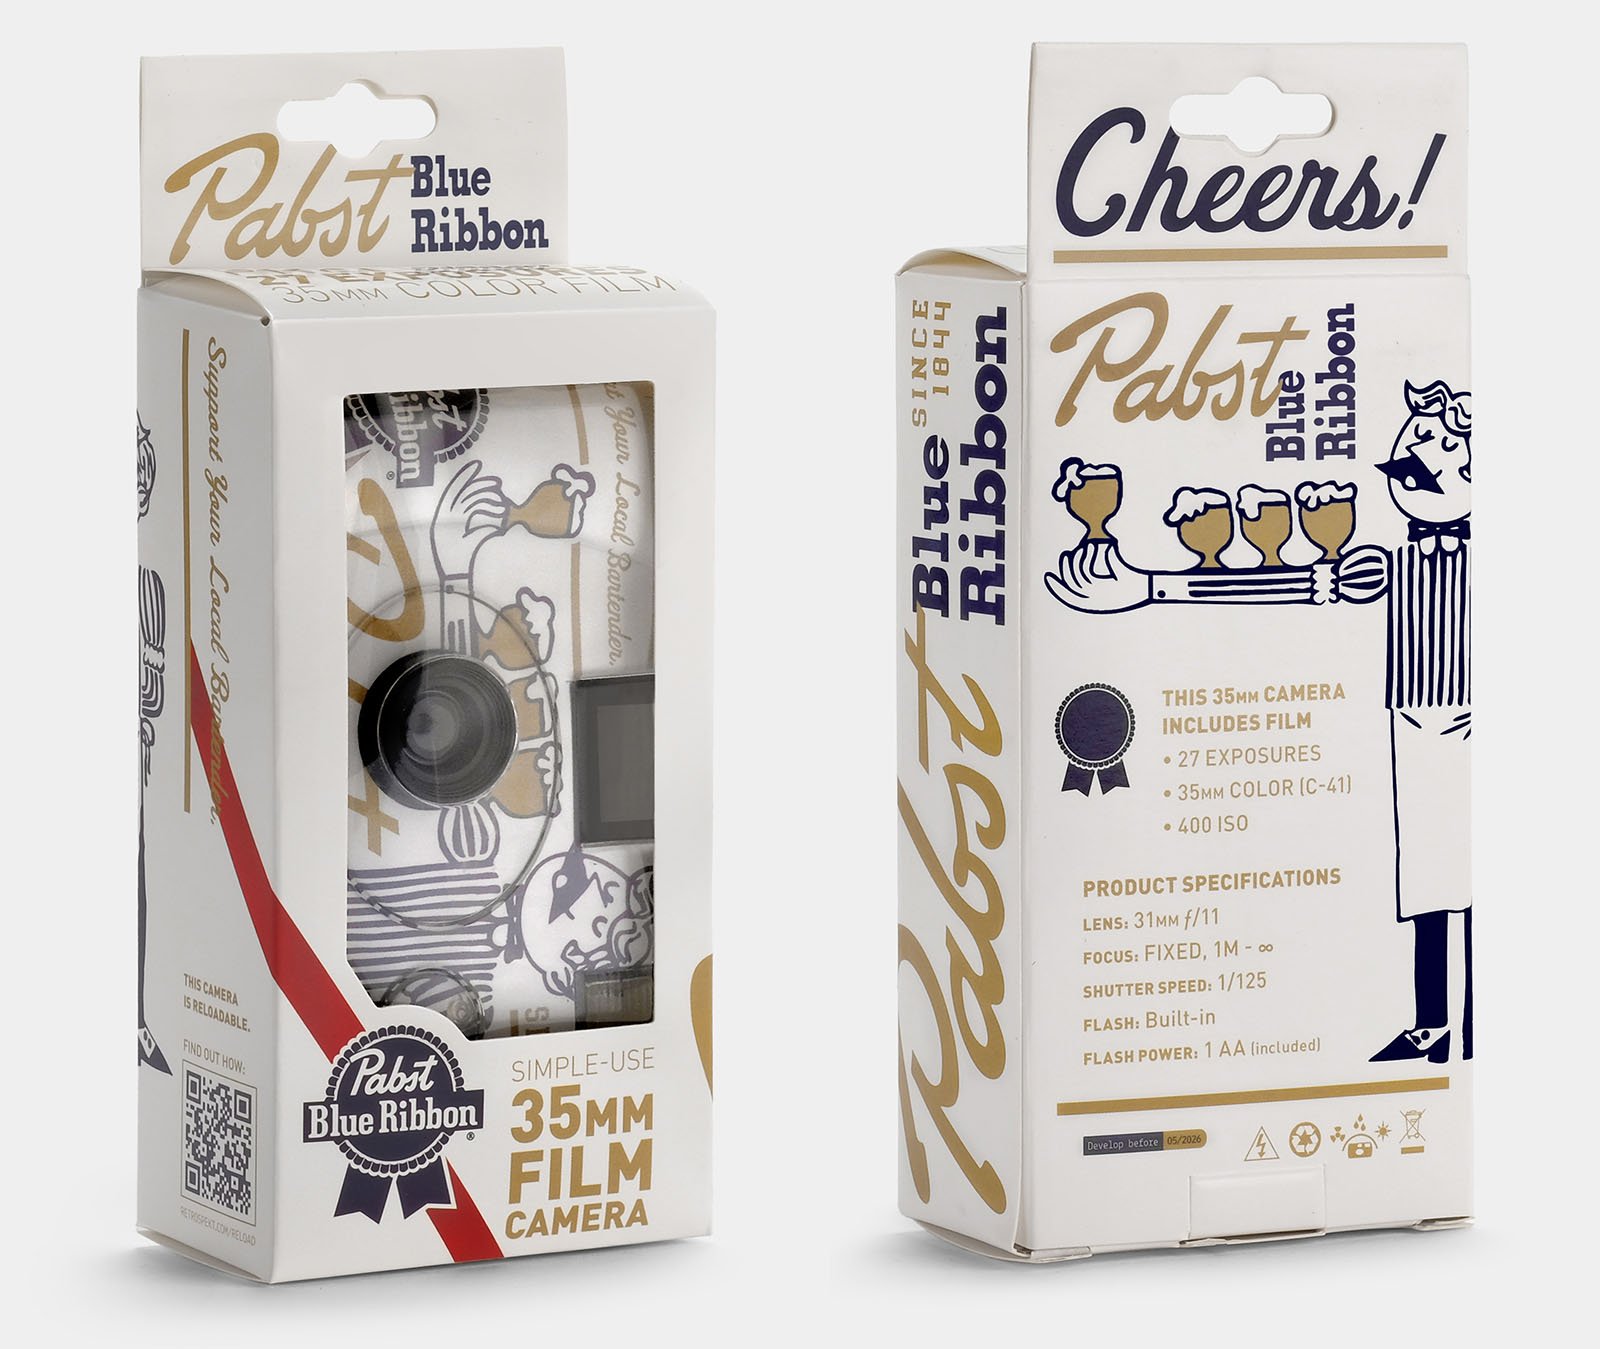 Two boxes of Pabst Blue Ribbon 35mm film cameras. Each box features the Pabst Blue Ribbon logo, a vintage-style illustration of a person holding a drink, and text detailing specifications such as 27 exposures, 400 ISO, and a built-in flash.